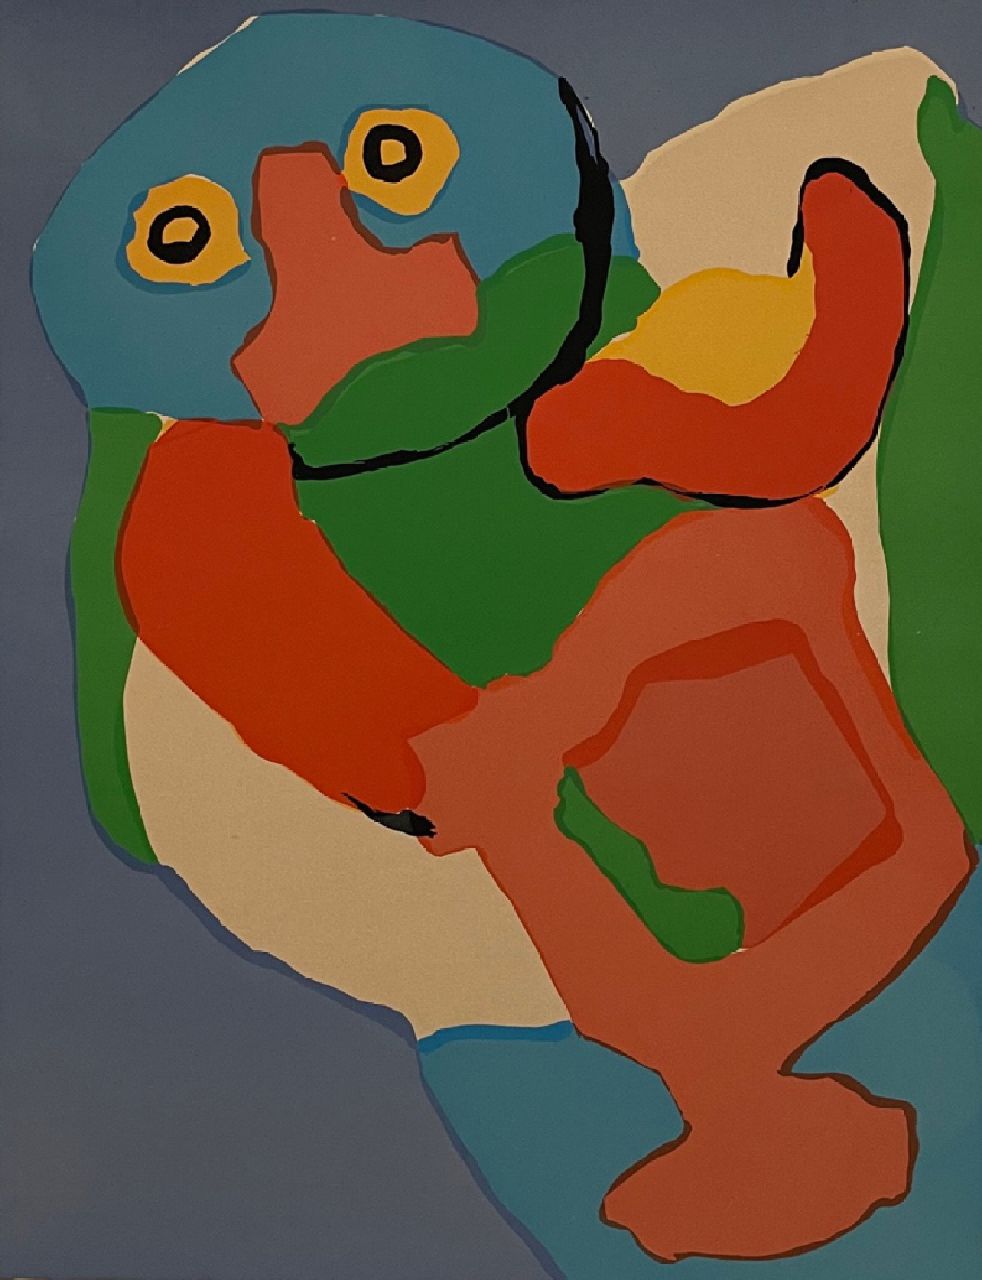 Appel C.K.  | Christiaan 'Karel' Appel | Prints and Multiples offered for sale | Dancing man, lithograph on paper 66.0 x 55.0 cm, signed l.r. (in pencil) and dated '70  (in pencil)